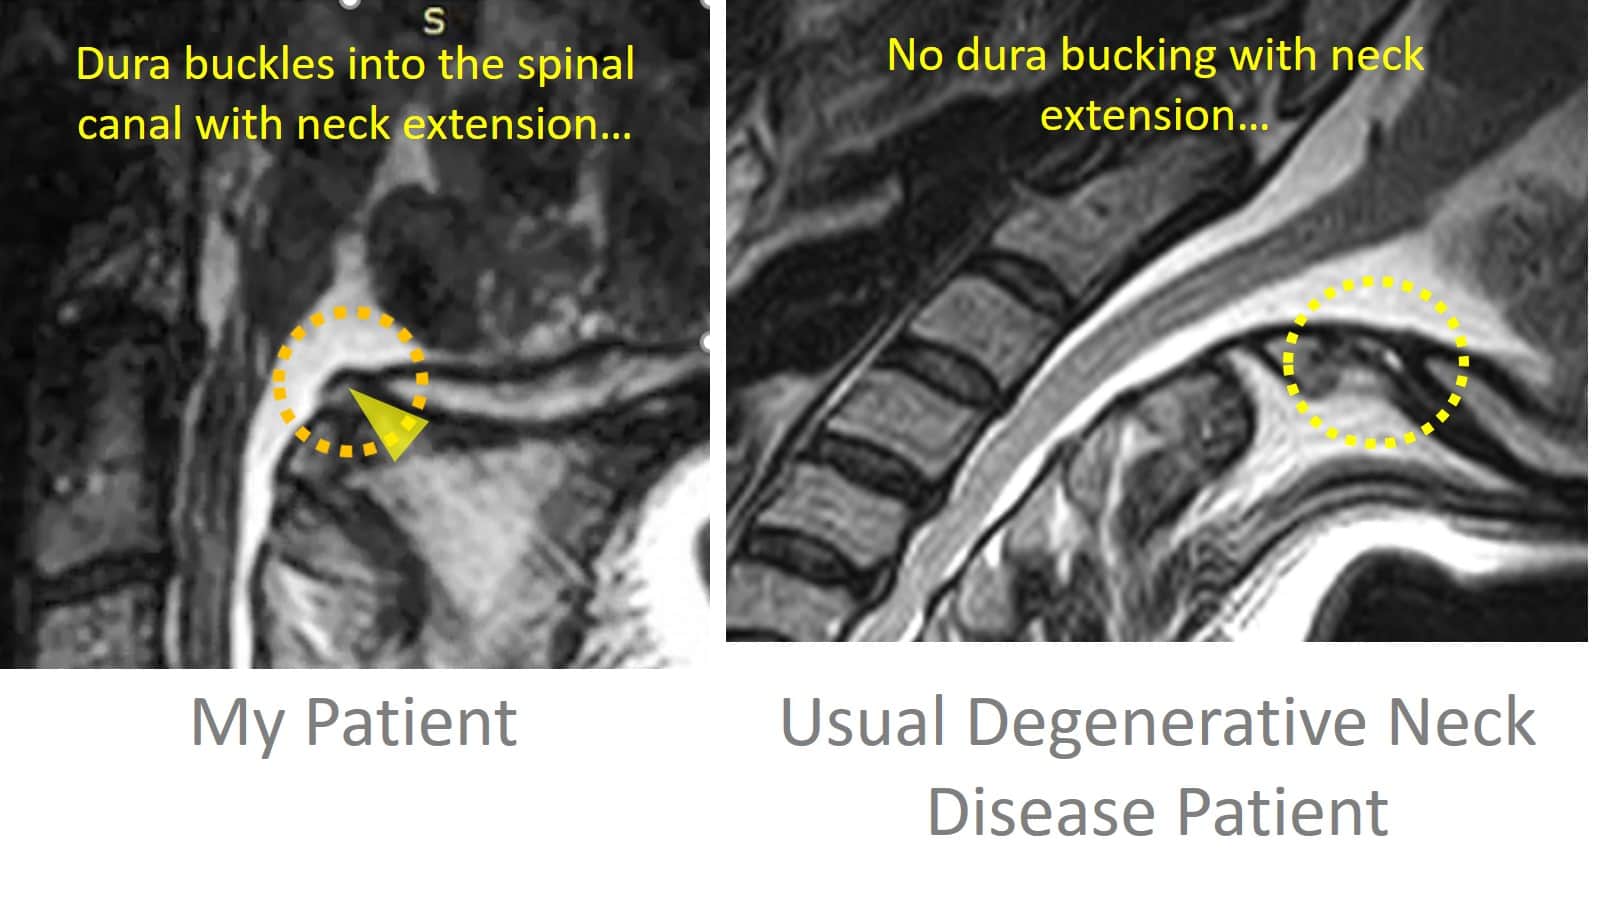 dura buckling with neck extension